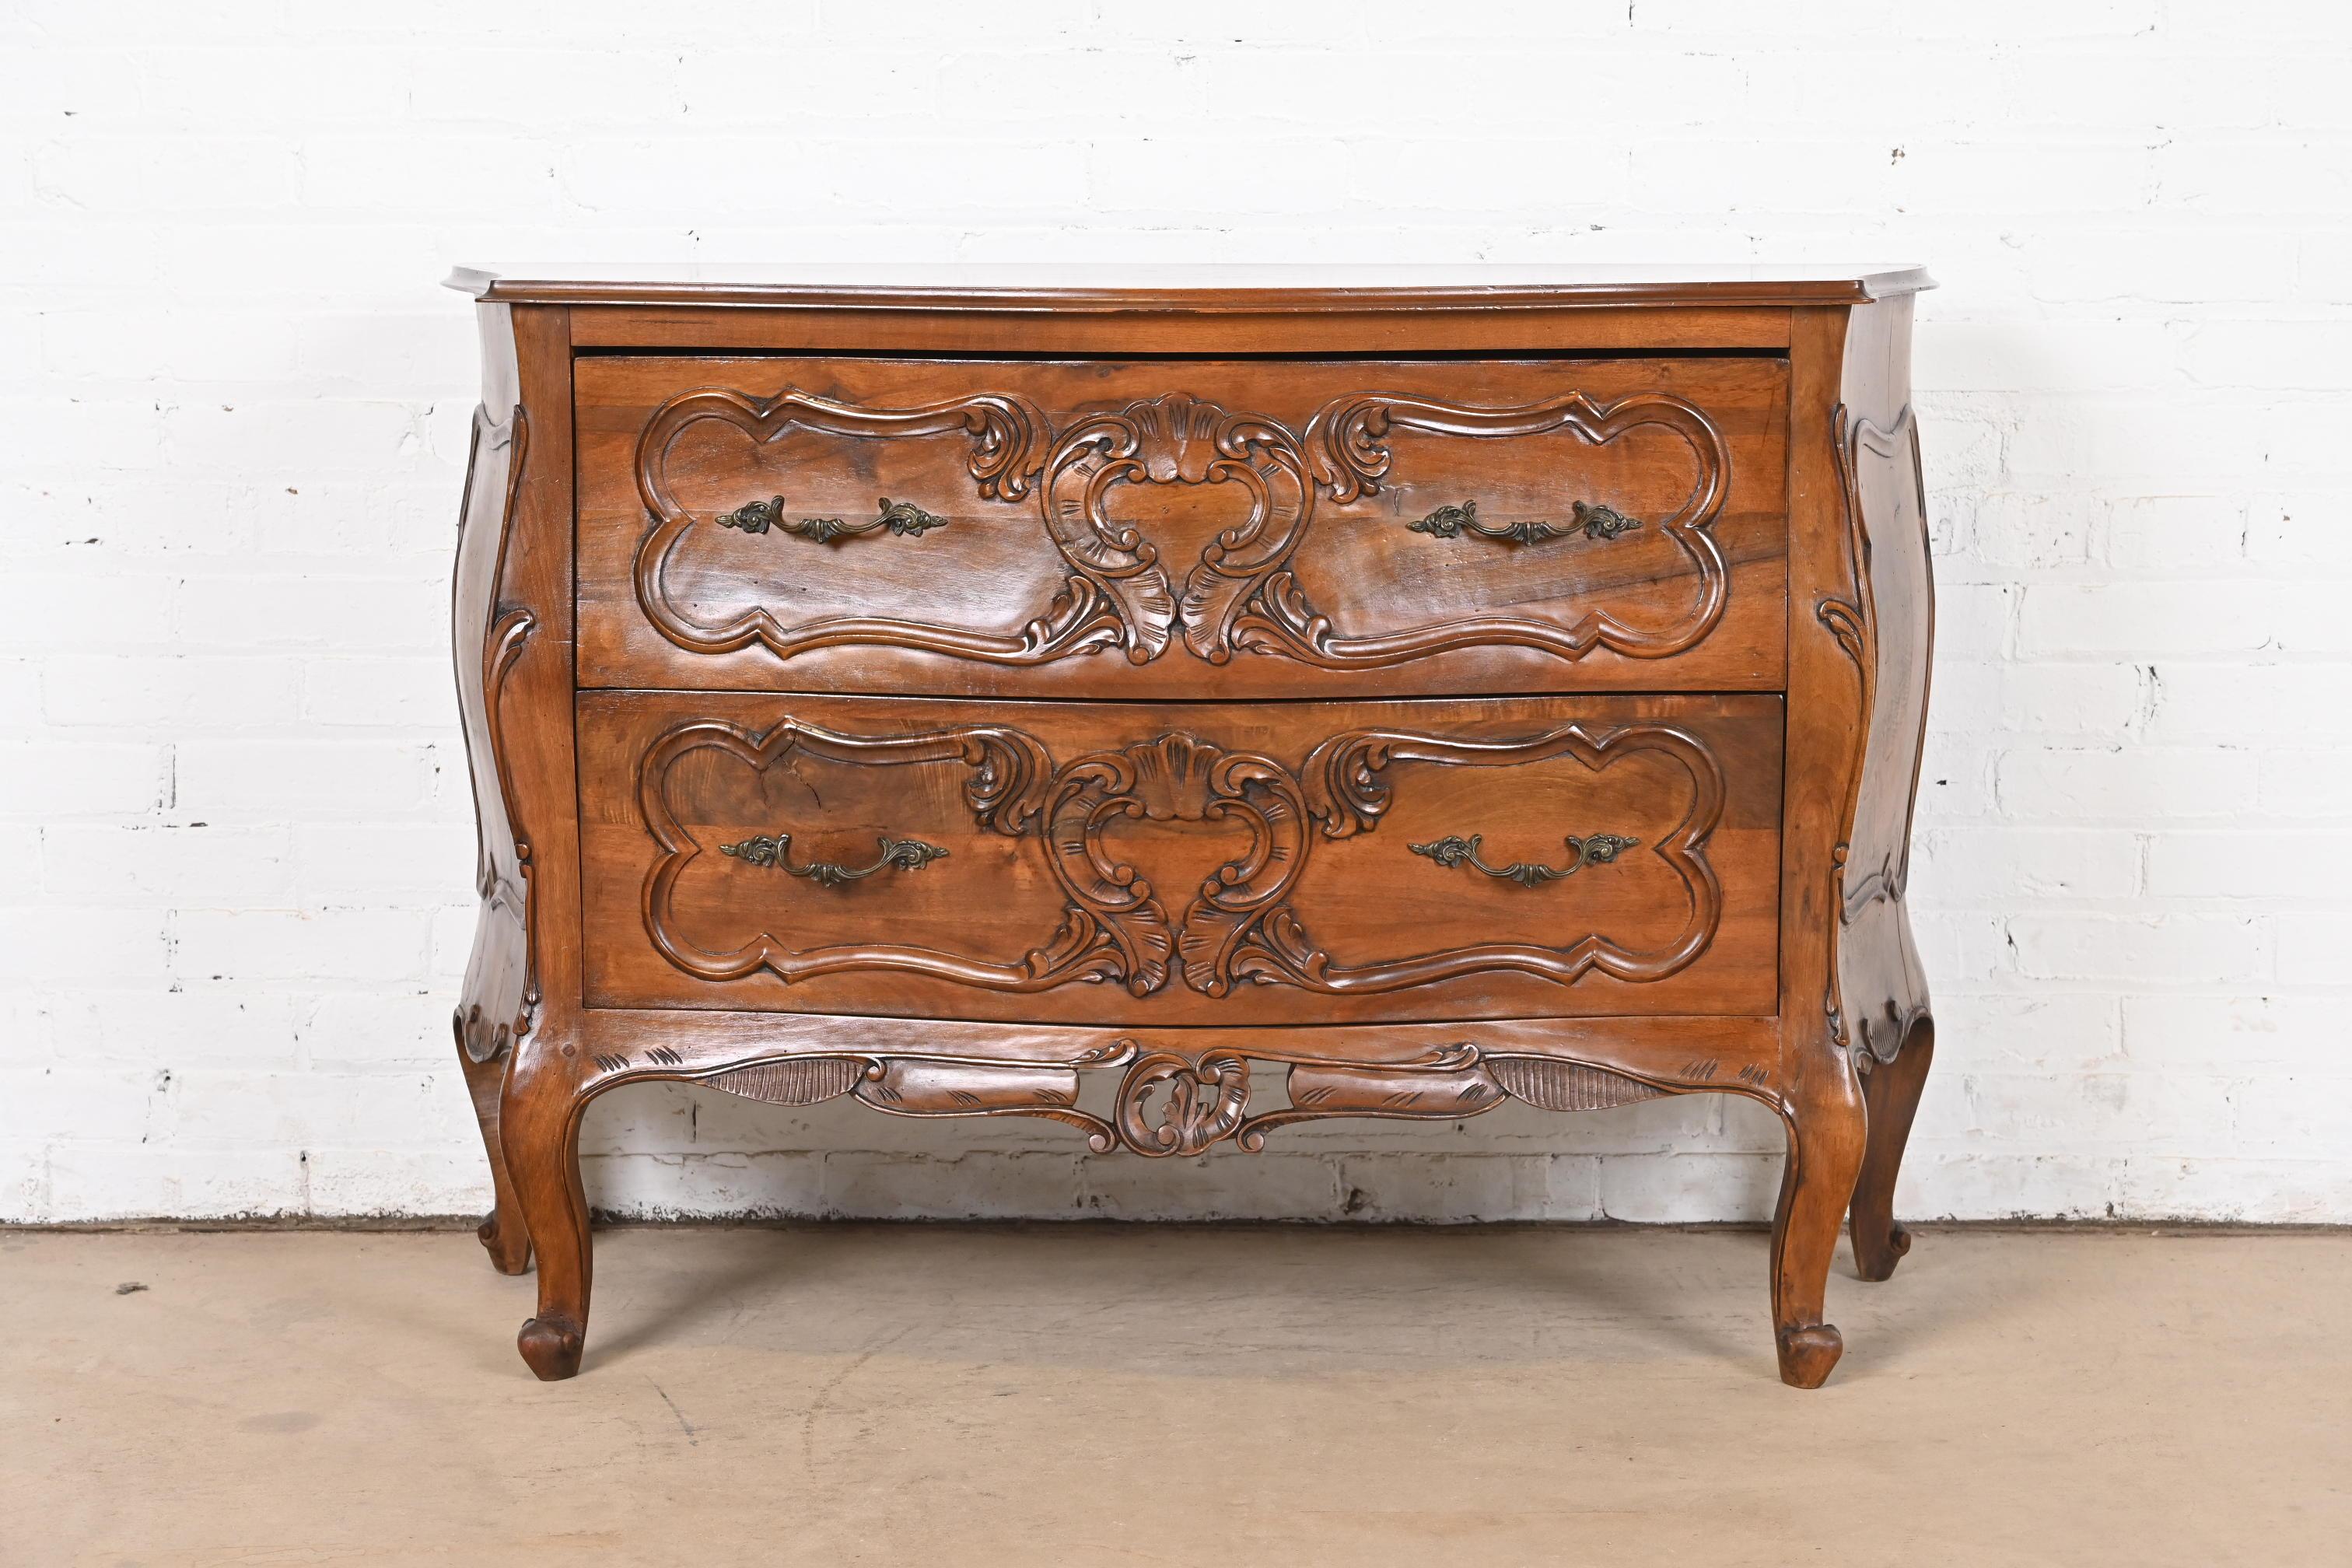 A gorgeous Italian Rococo or Louis XV style bombay chest, commode, or chest of drawers

In the manner of Baker Furniture

Italy, Late 20th Century

Carved walnut, with original brass hardware.

Measures: 45.5